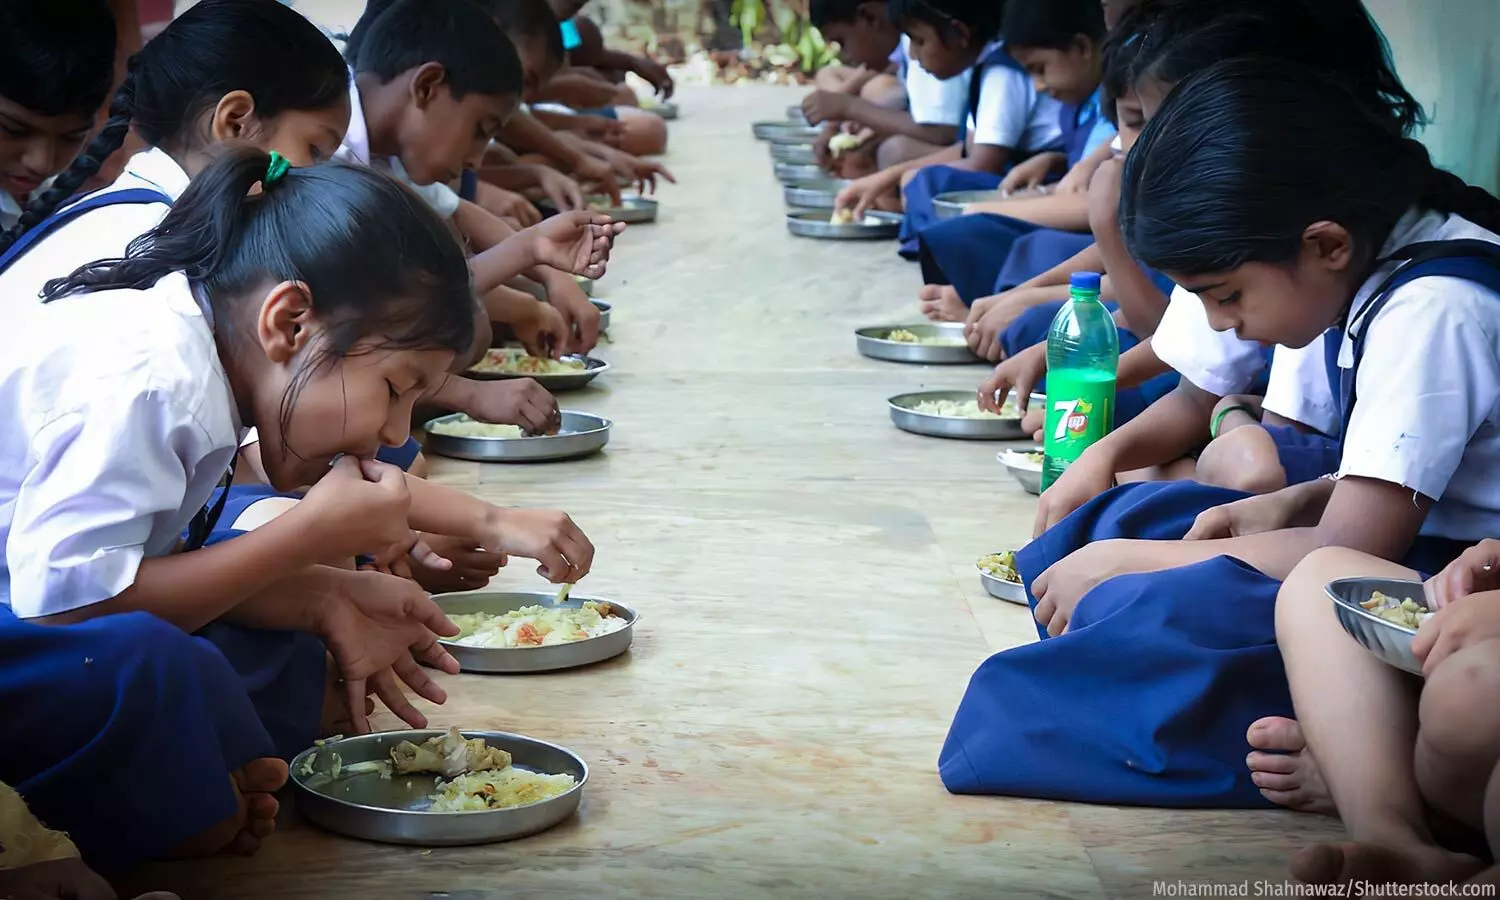 India UnderSpends On Nutrition, New Nutrition Programme Yet To Be Implemented